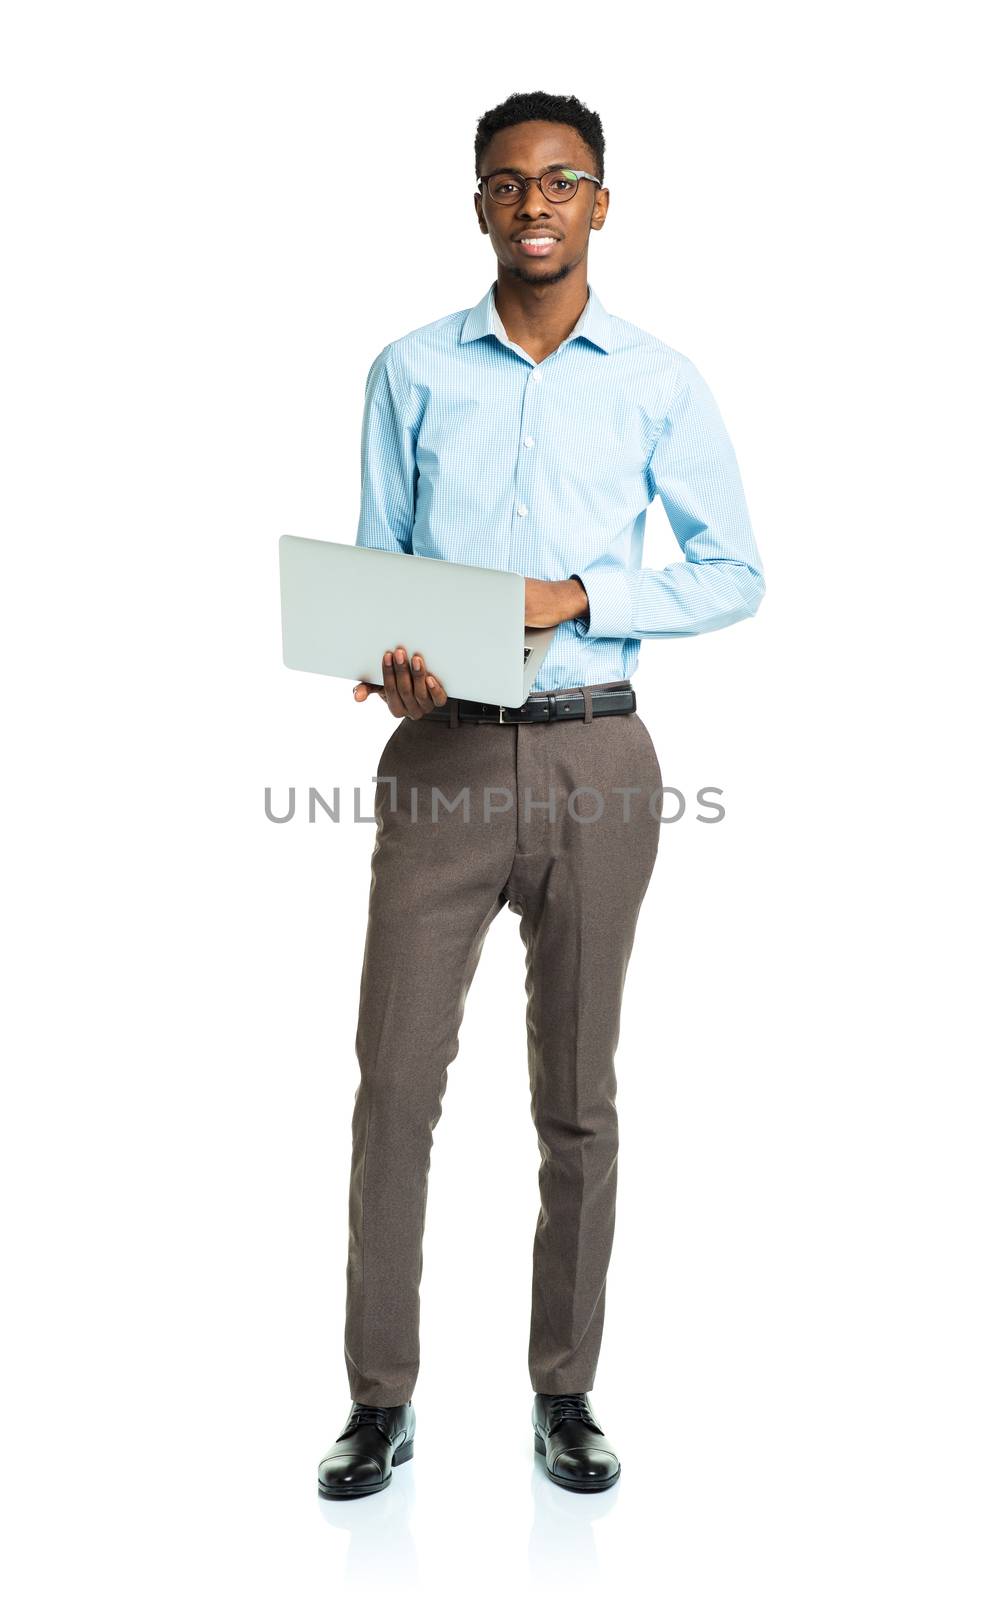 Happy african american college student with laptop standing on white background